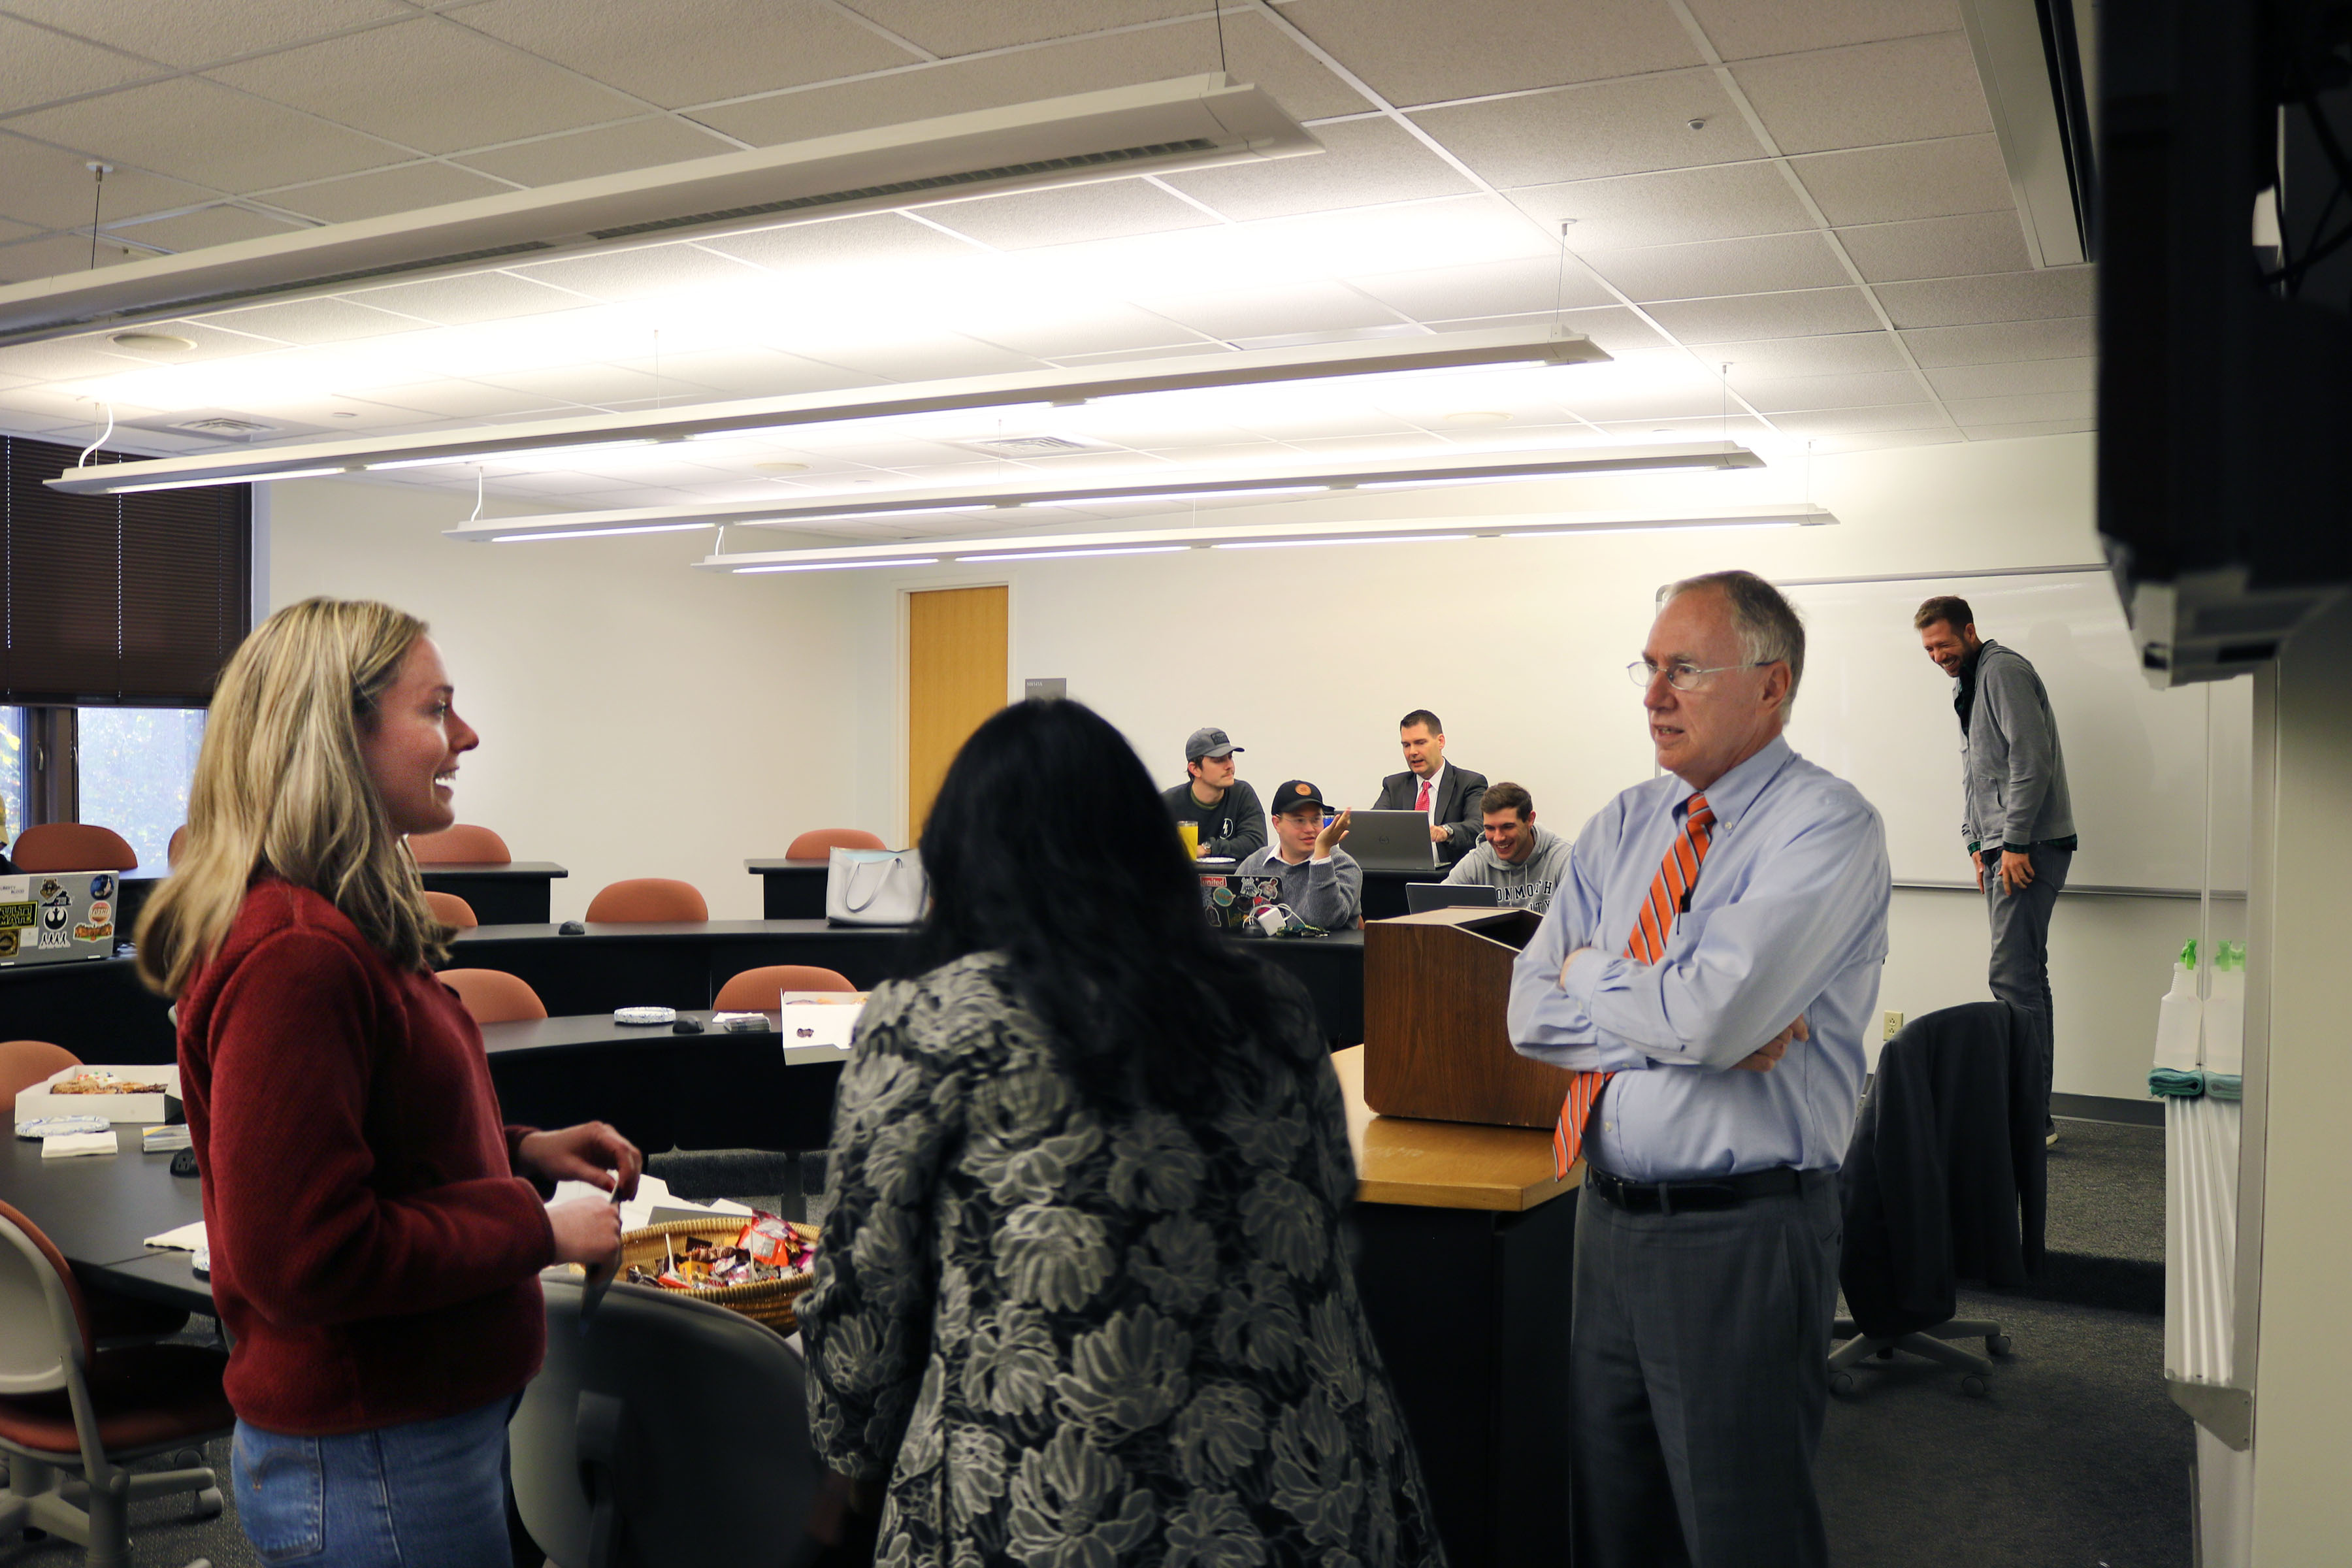 Mr. Travers conversing with students during a meet-and-greet at the William & Mary Law School